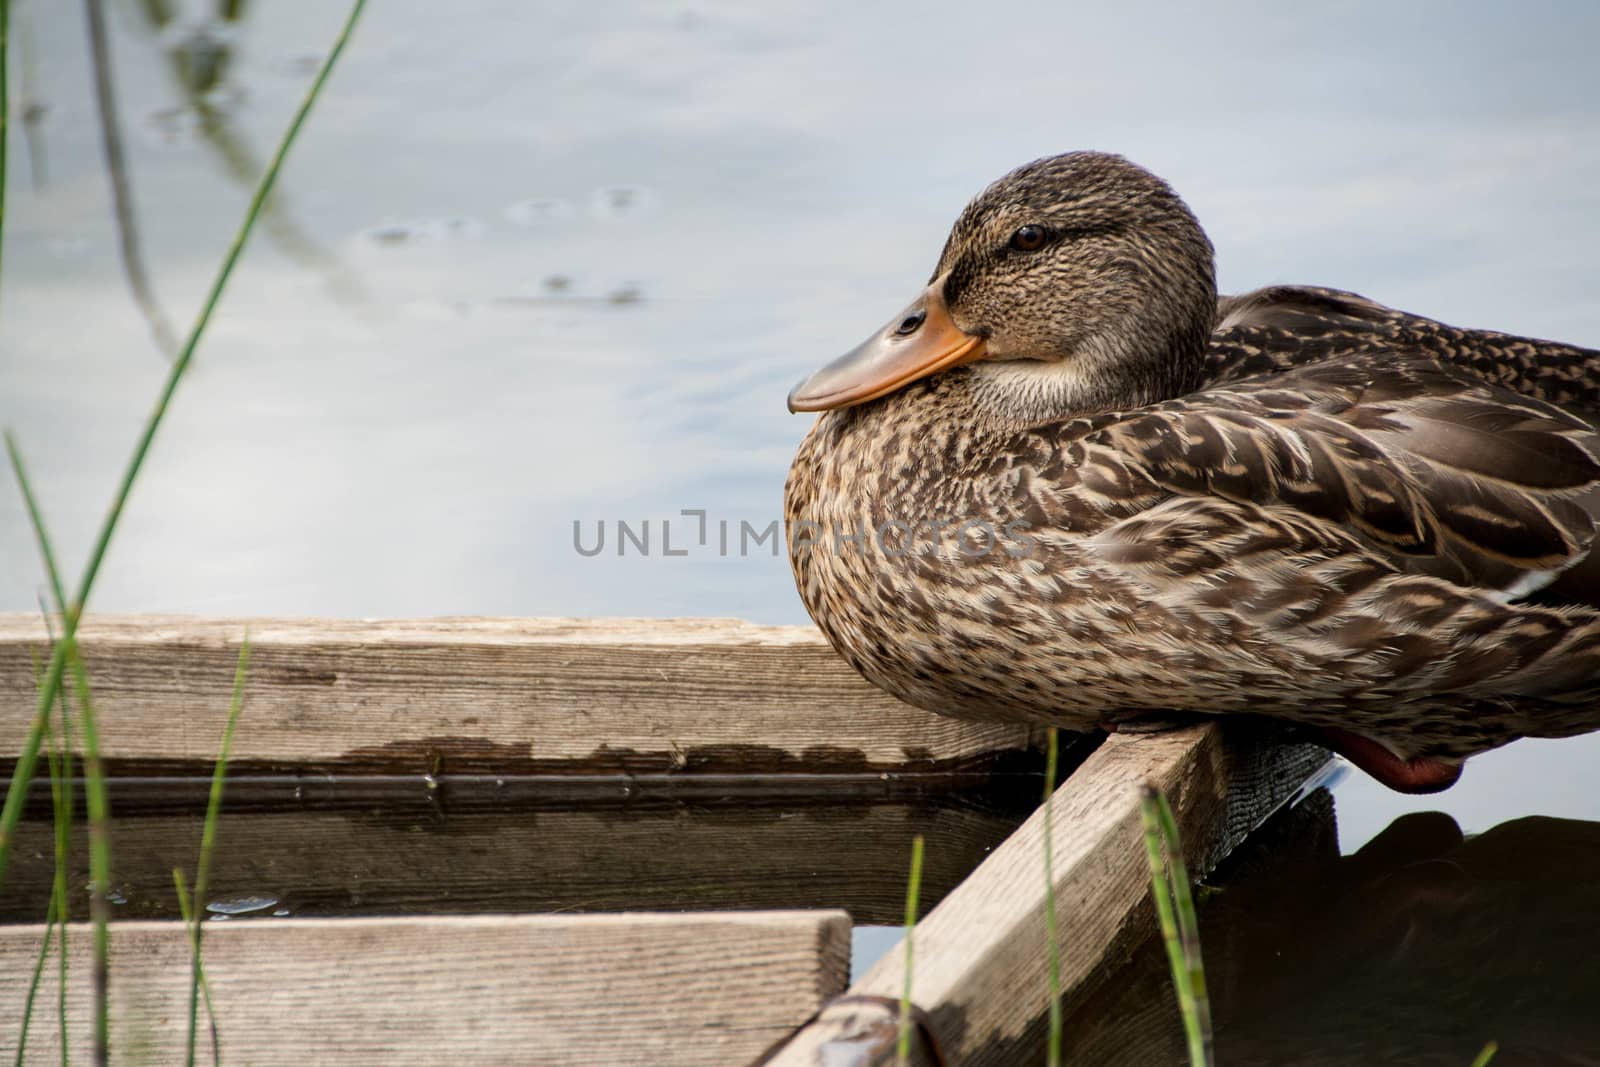 Wild duck is sitting on a wooden platform on the river